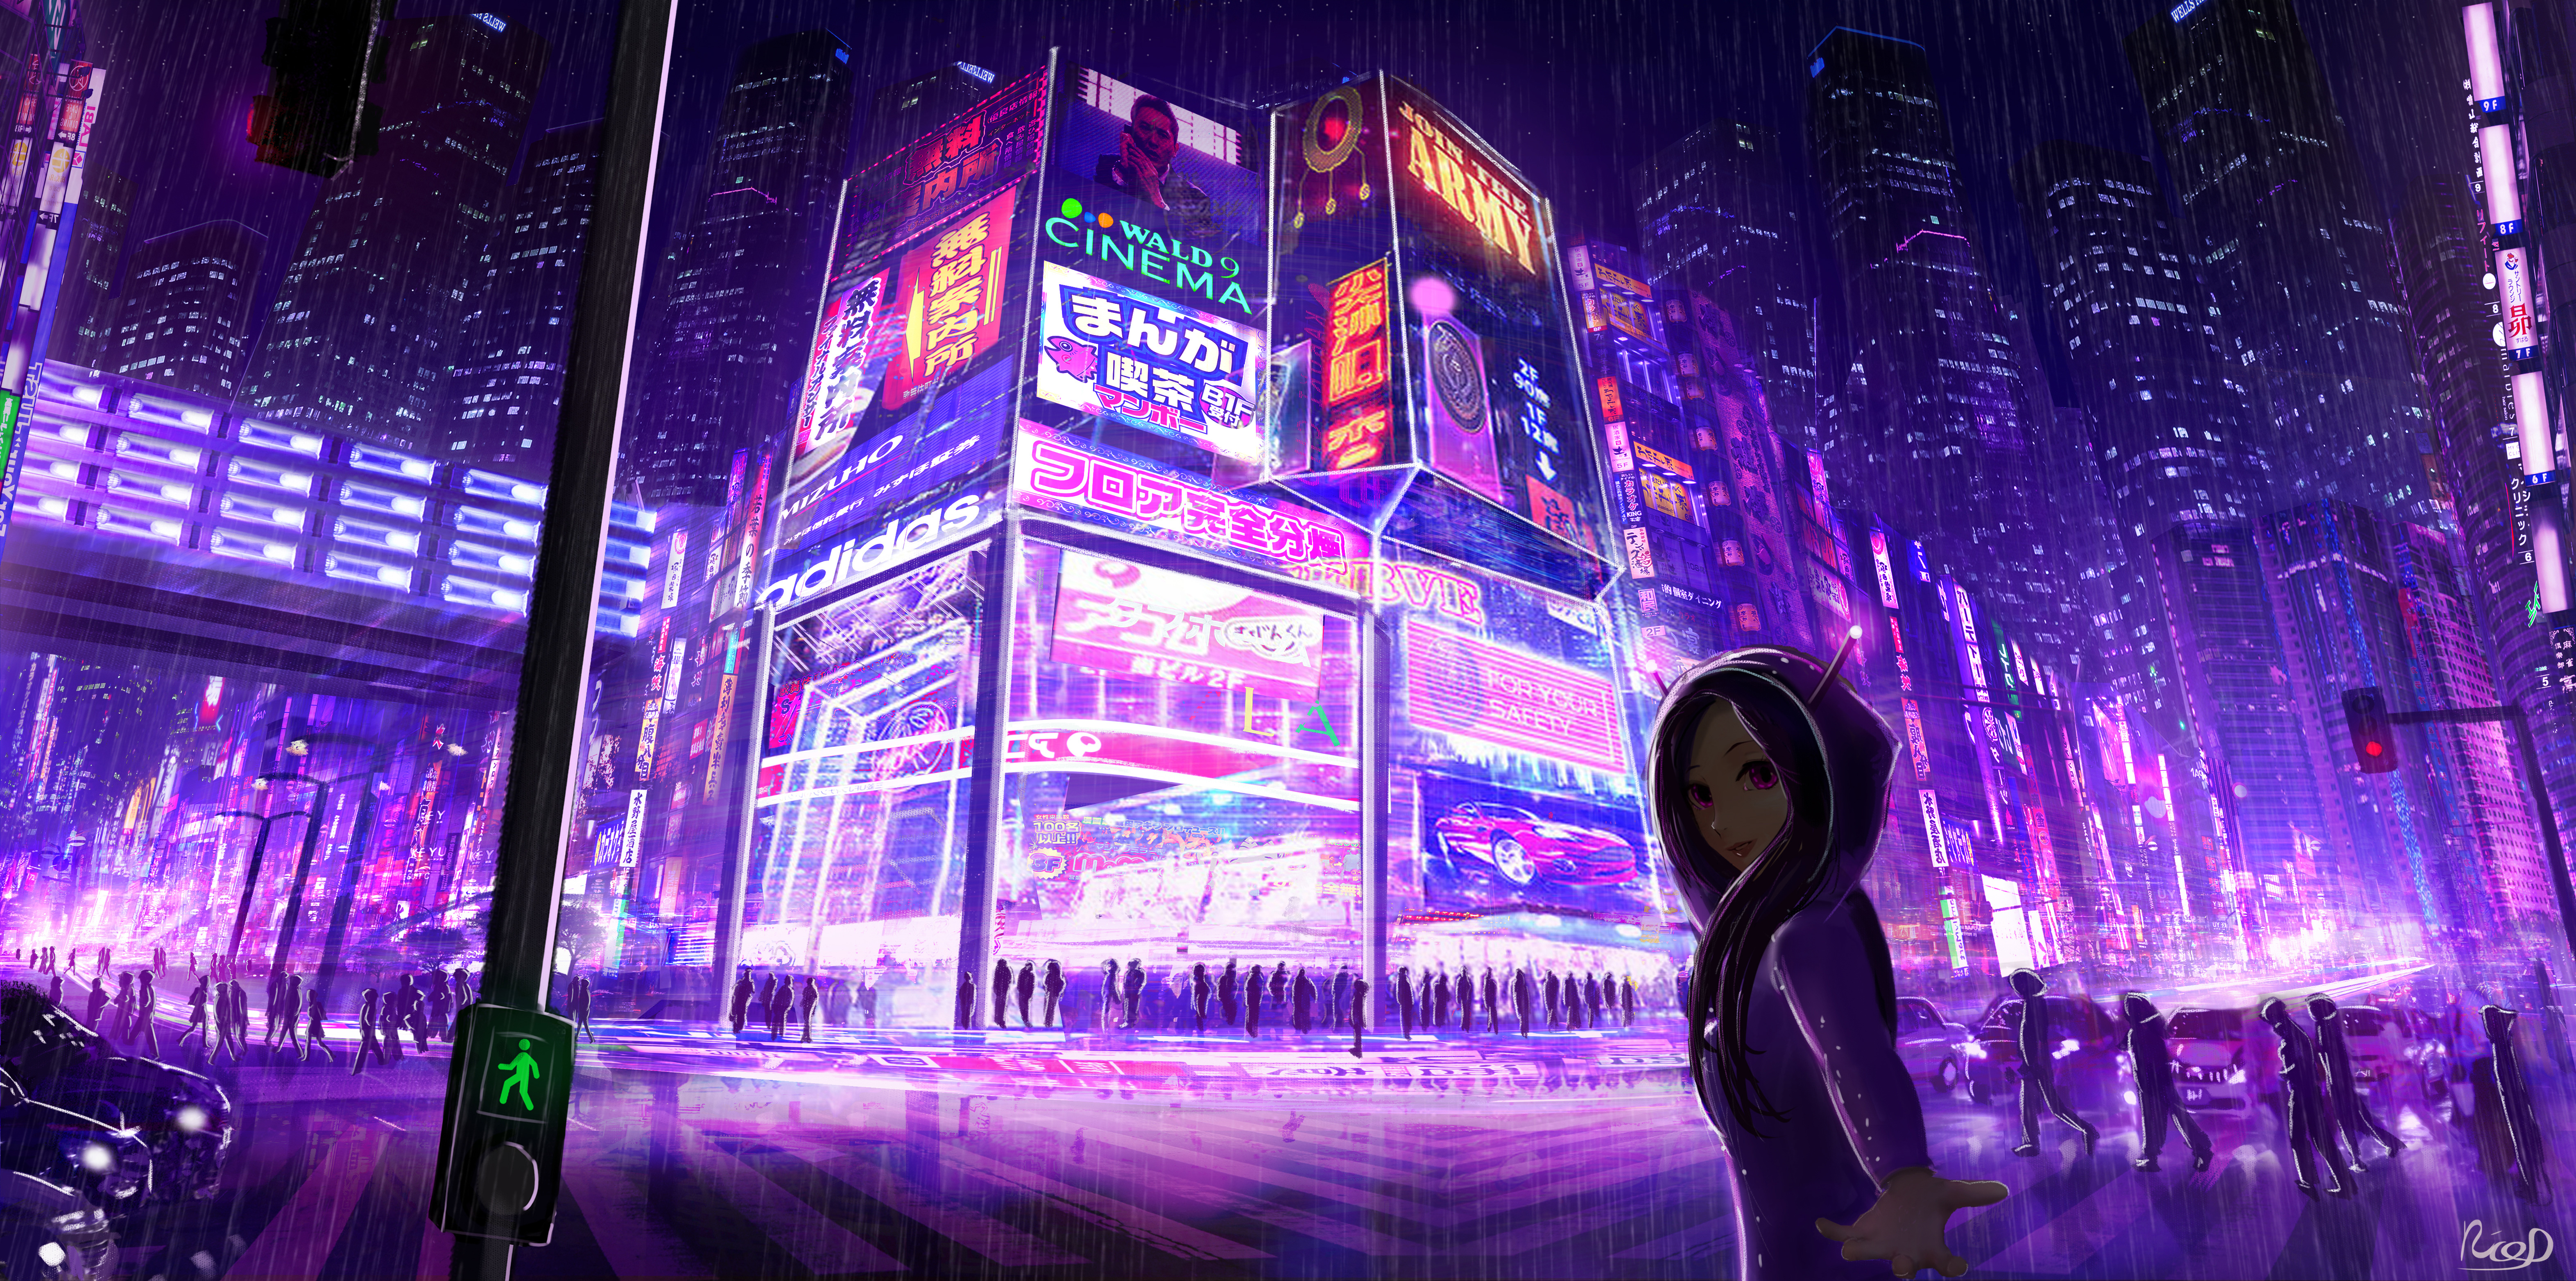 100+] Cyberpunk Android Wallpapers